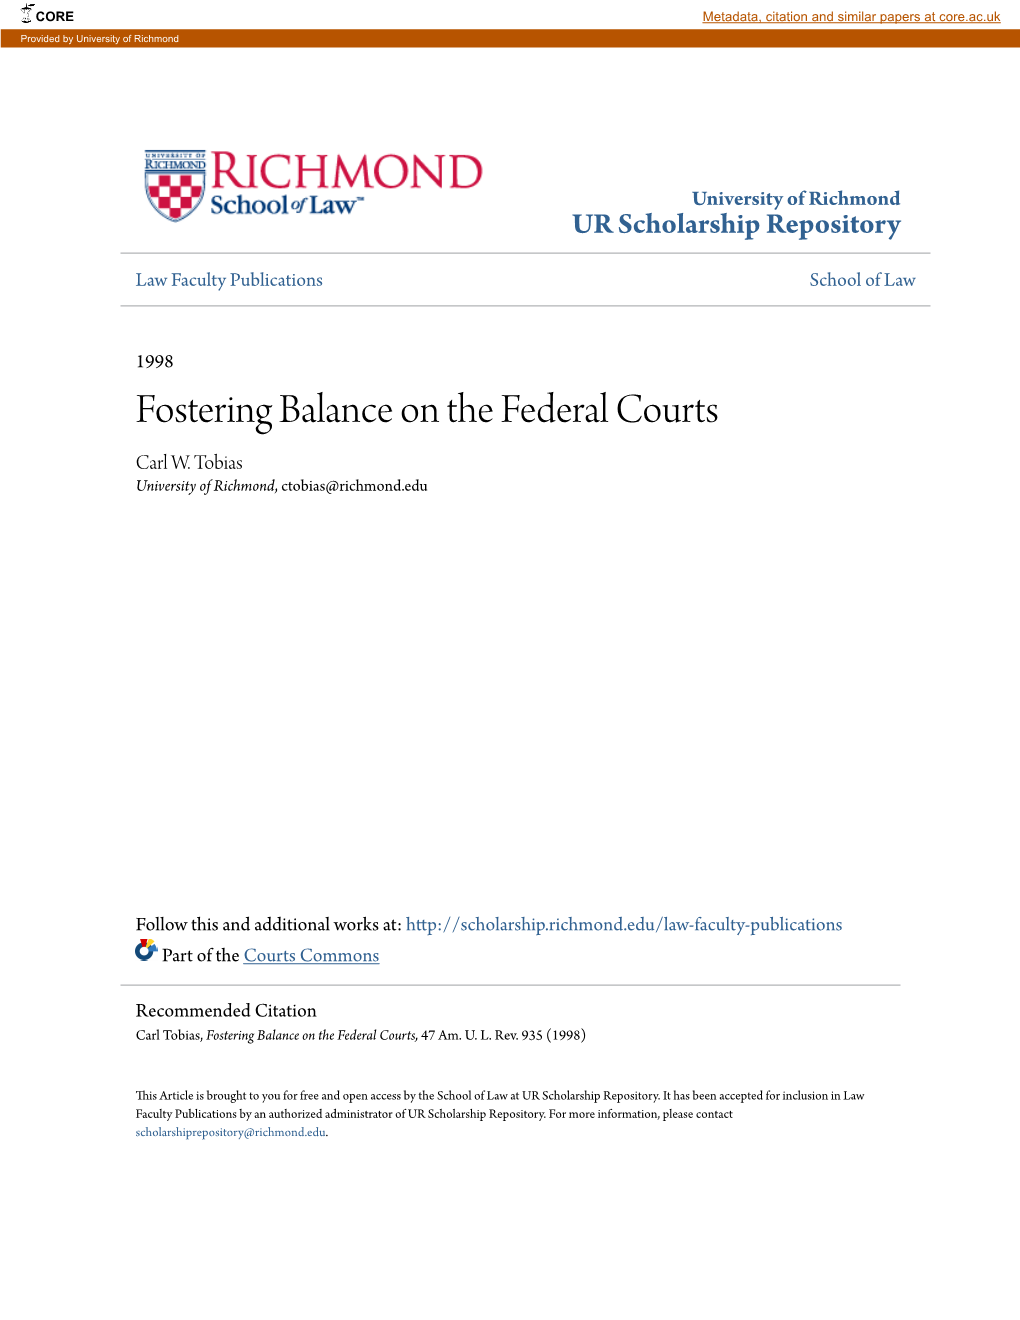 Fostering Balance on the Federal Courts Carl W